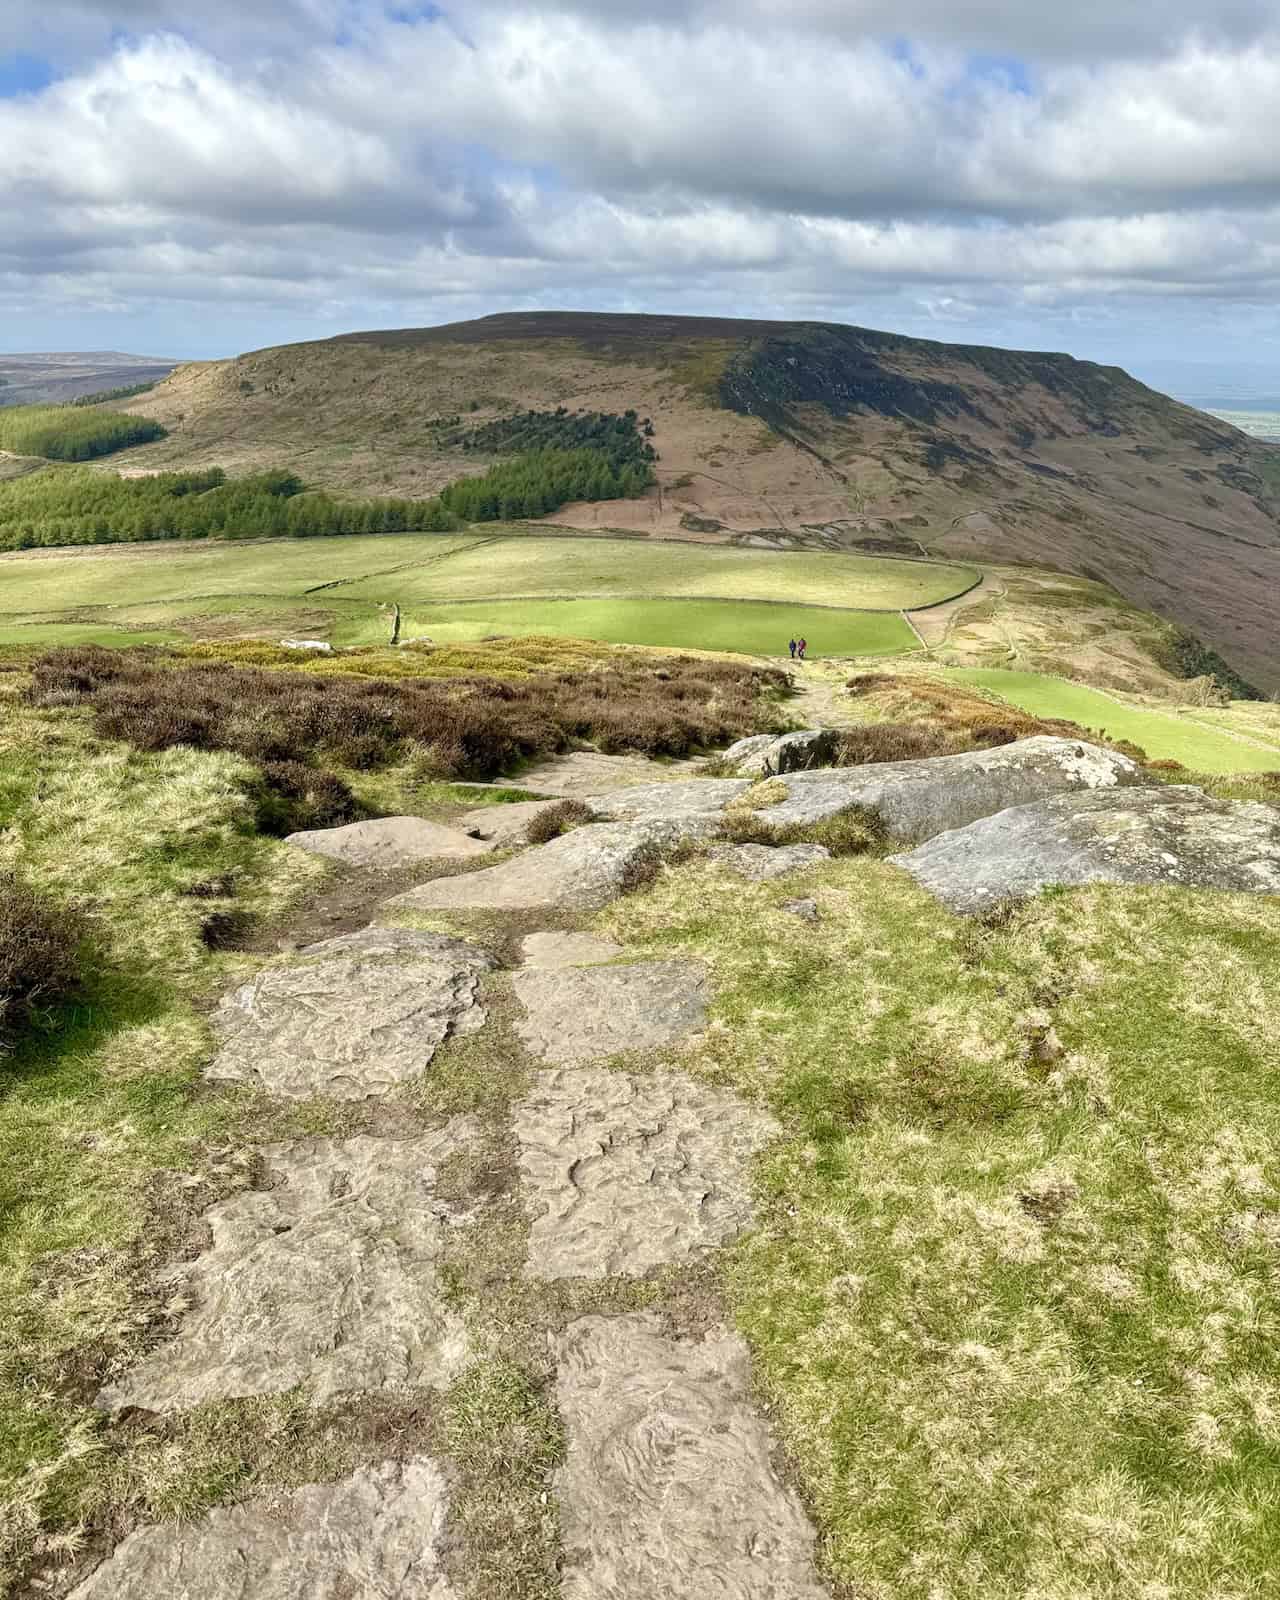 From the summit of Cold Moor, the track descends westward, and our next ascent, the climb to the top of Cringle Moor, comes into view. A path around the northern side offers a gradient-free alternative to the summit, leading to the same location at Lordstones.